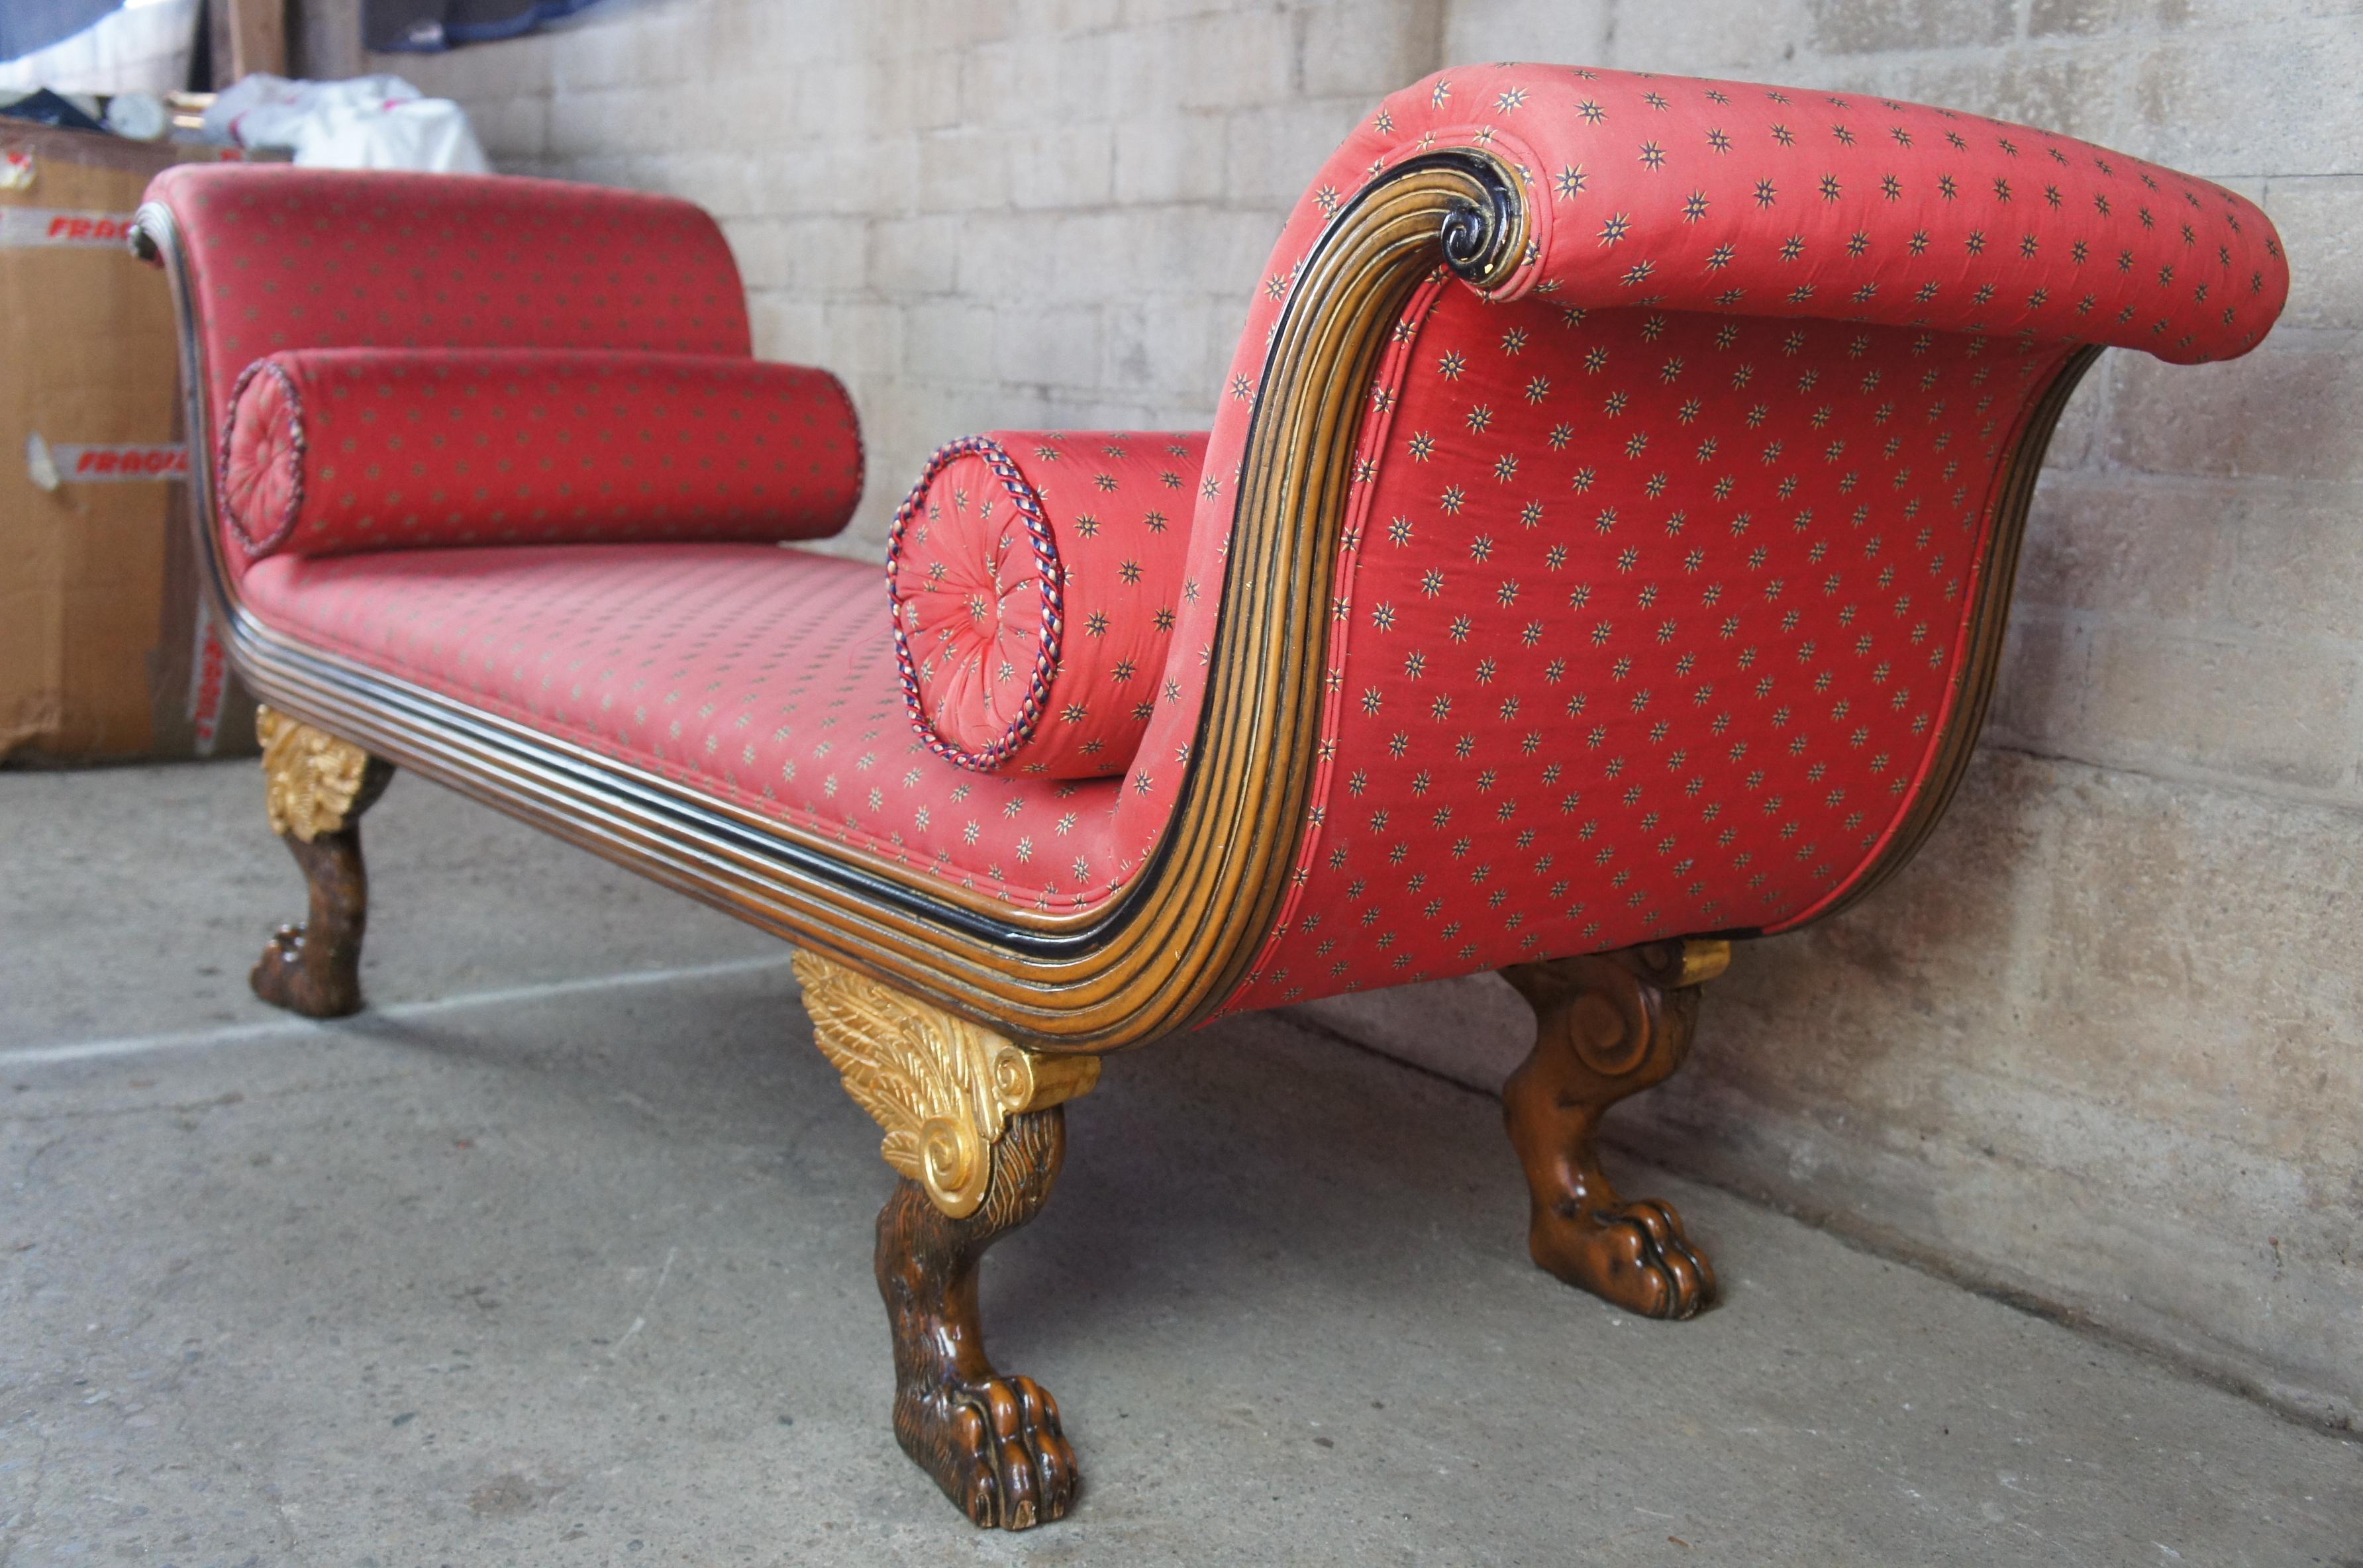 Upholstery Baker Furniture French Empire Style Sleigh Bench Mahogany Red Loveseat Settee